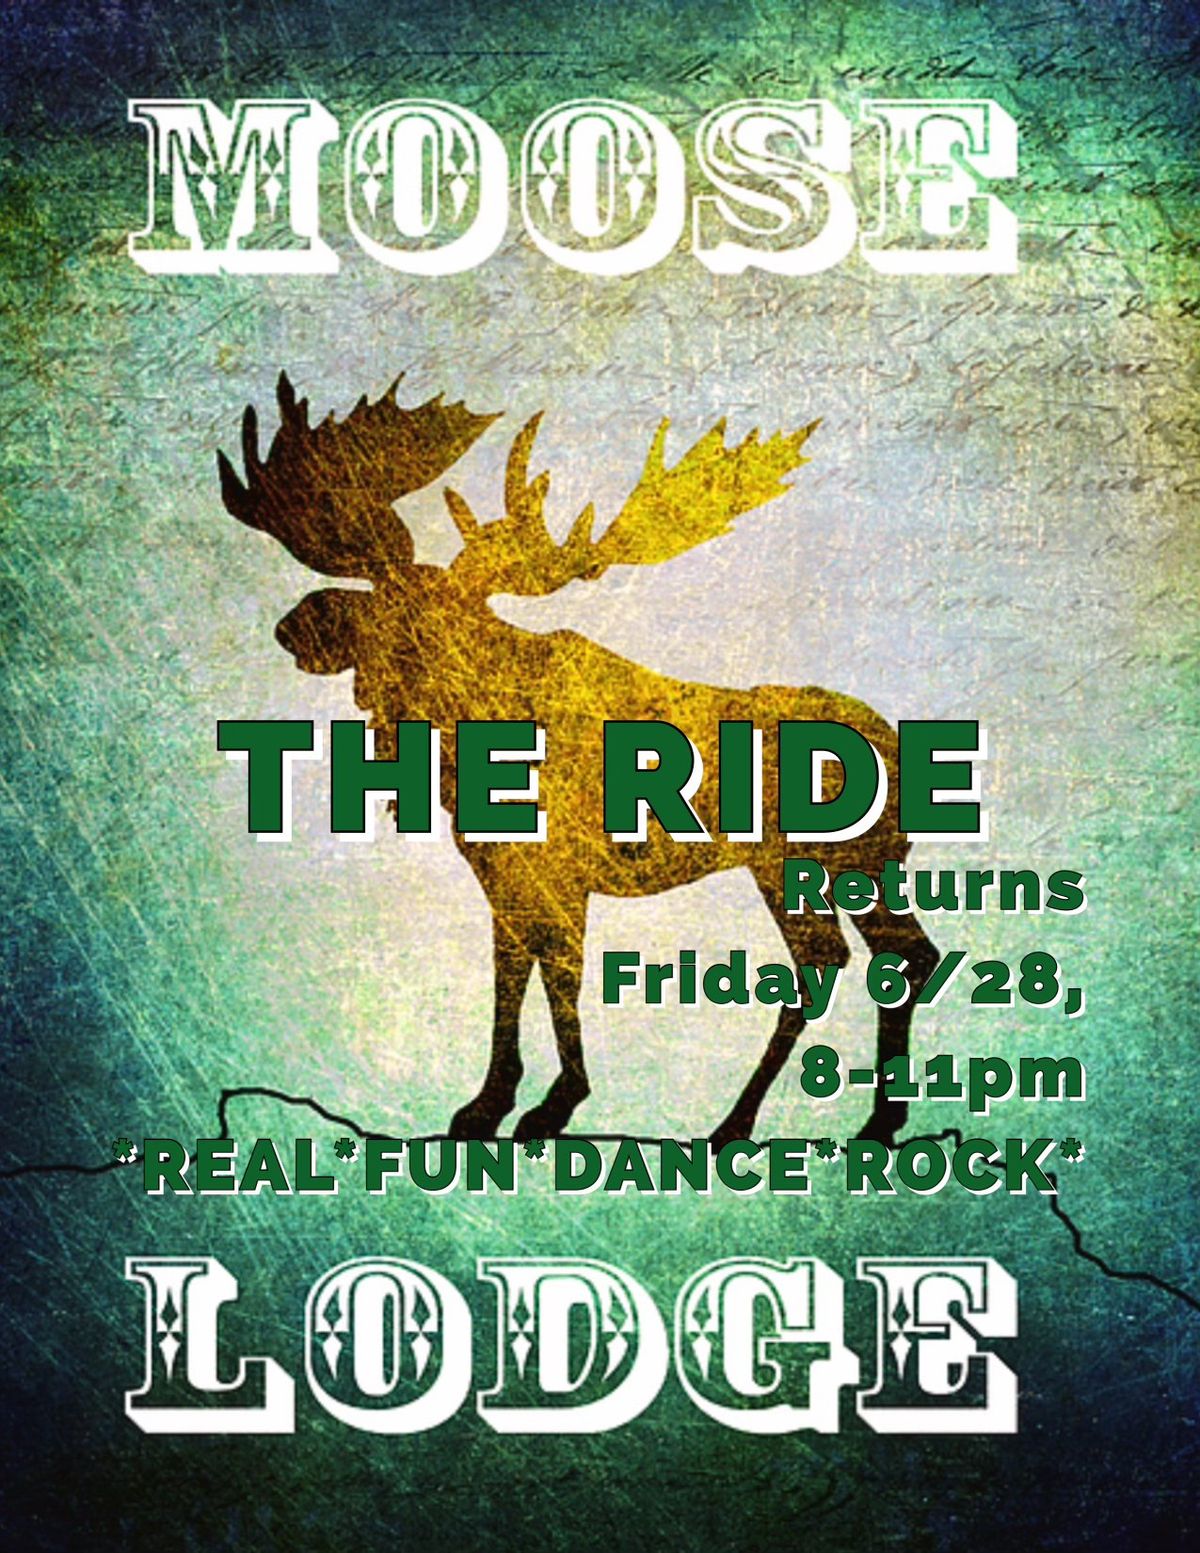 The Moose is loose!